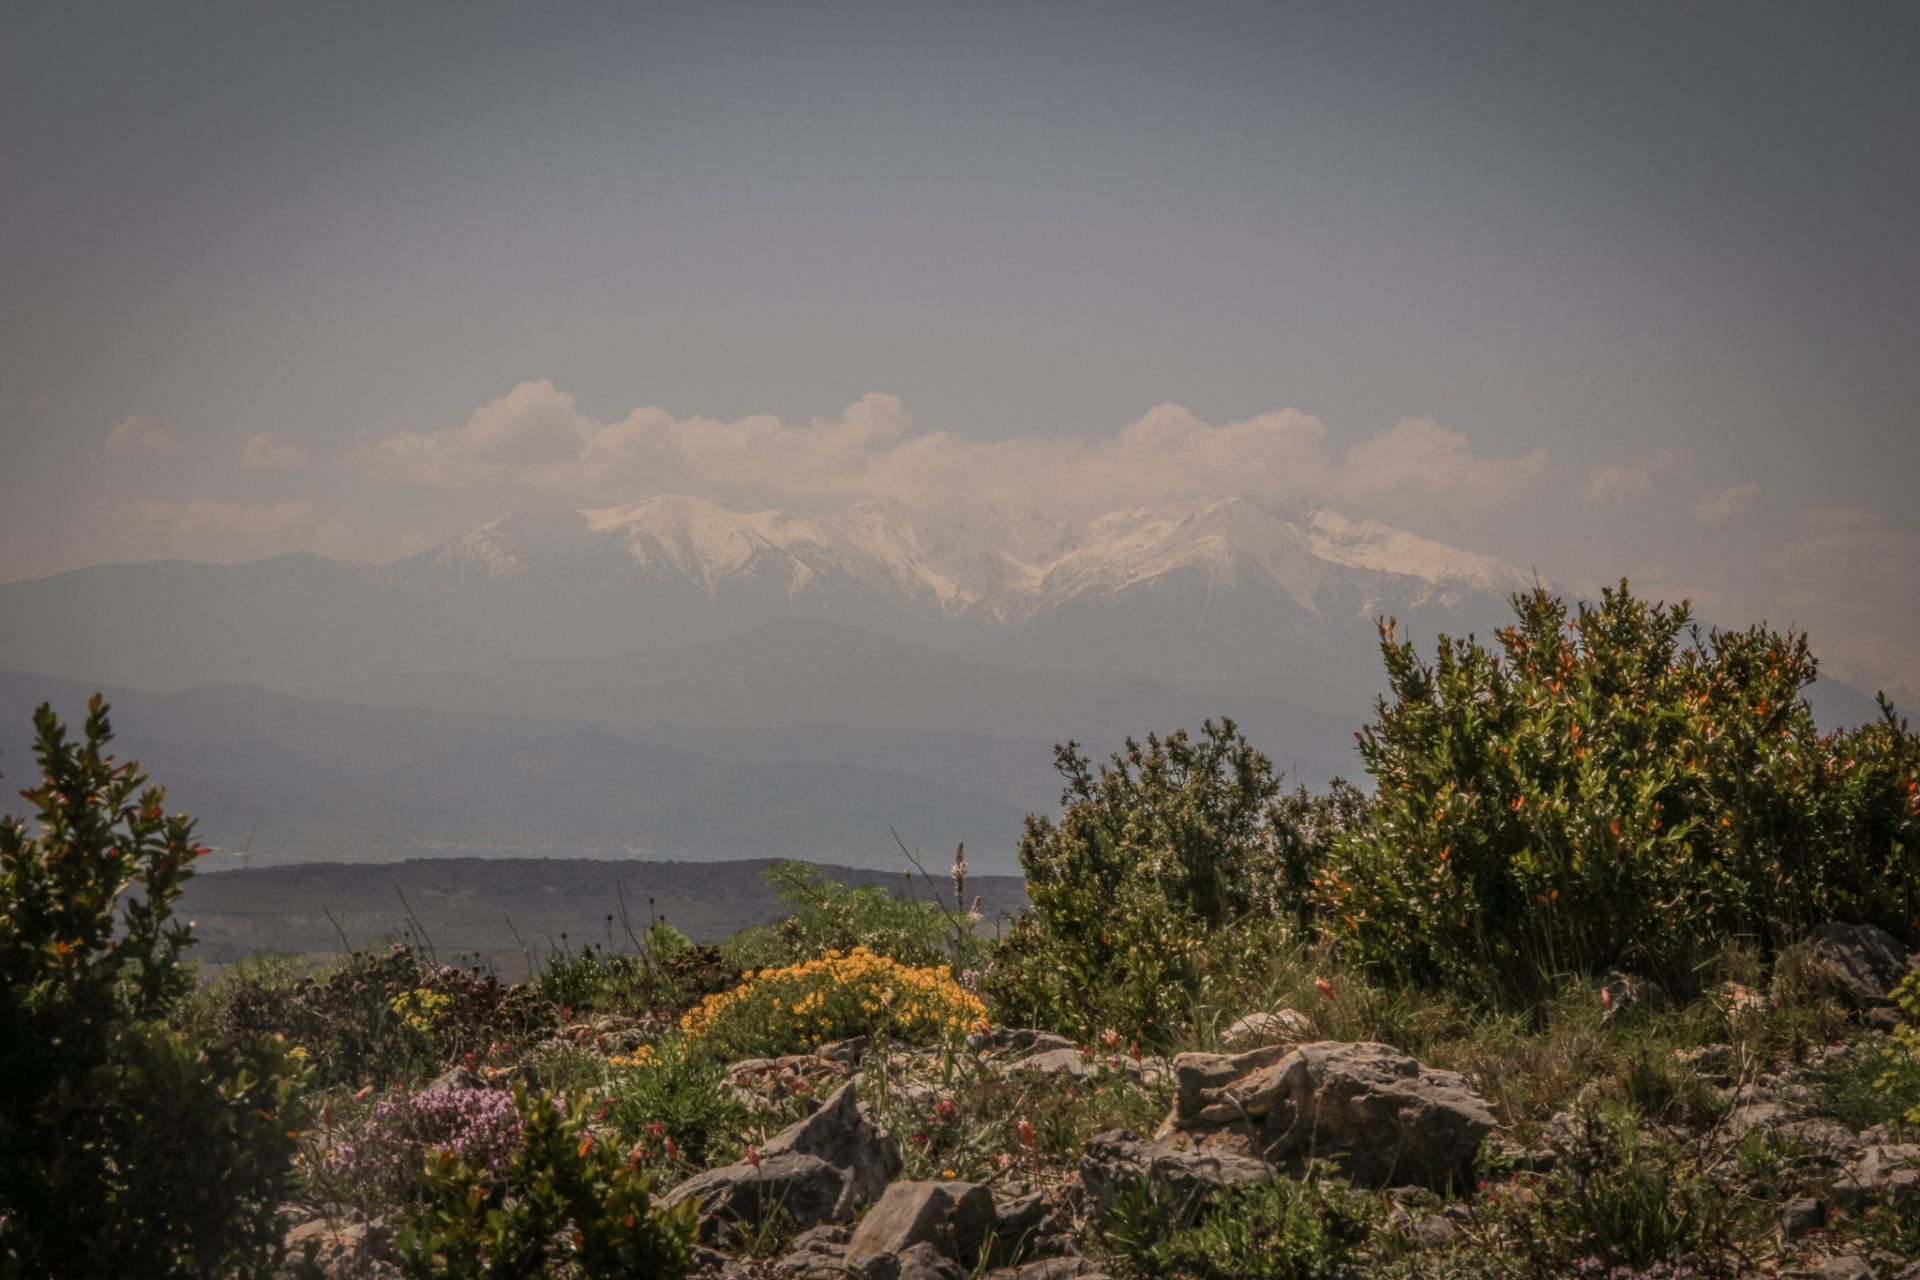 Looking at the foothills of the Pyrenees from Roussillon (Photo by Stefan Schwytz)